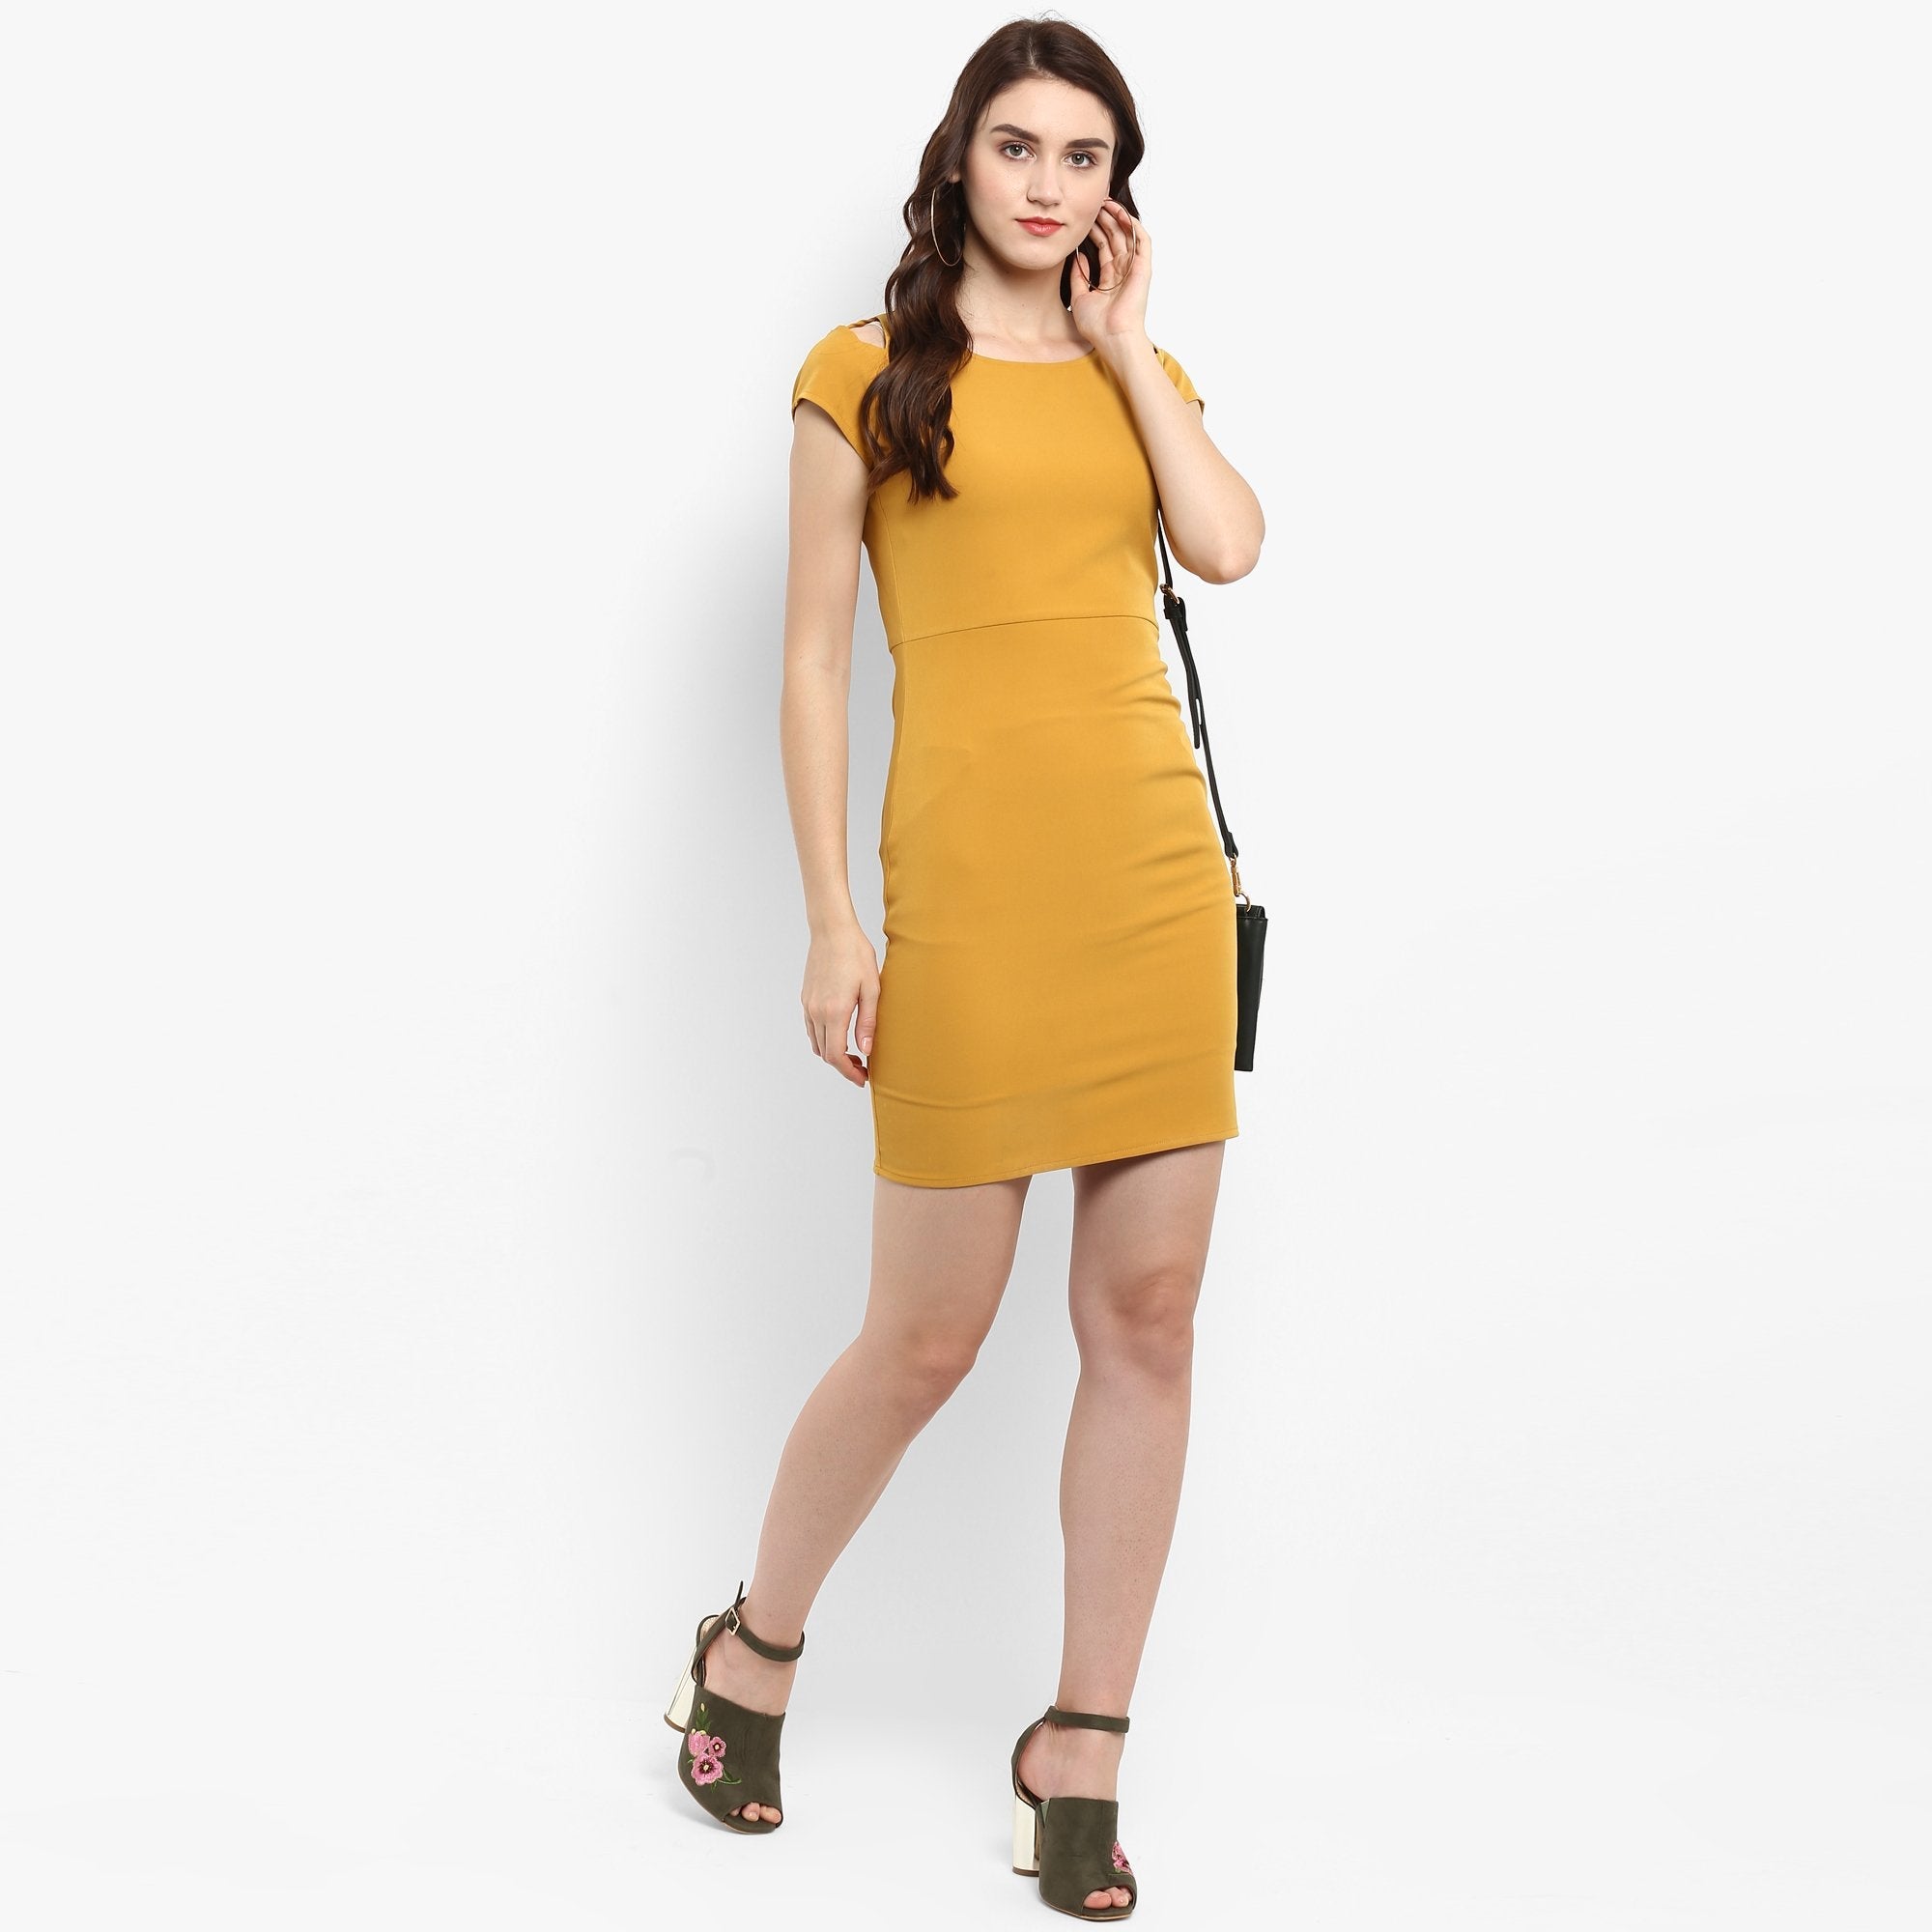 Women's Solid Fitted Dress With Cut At Shoulder - Pannkh